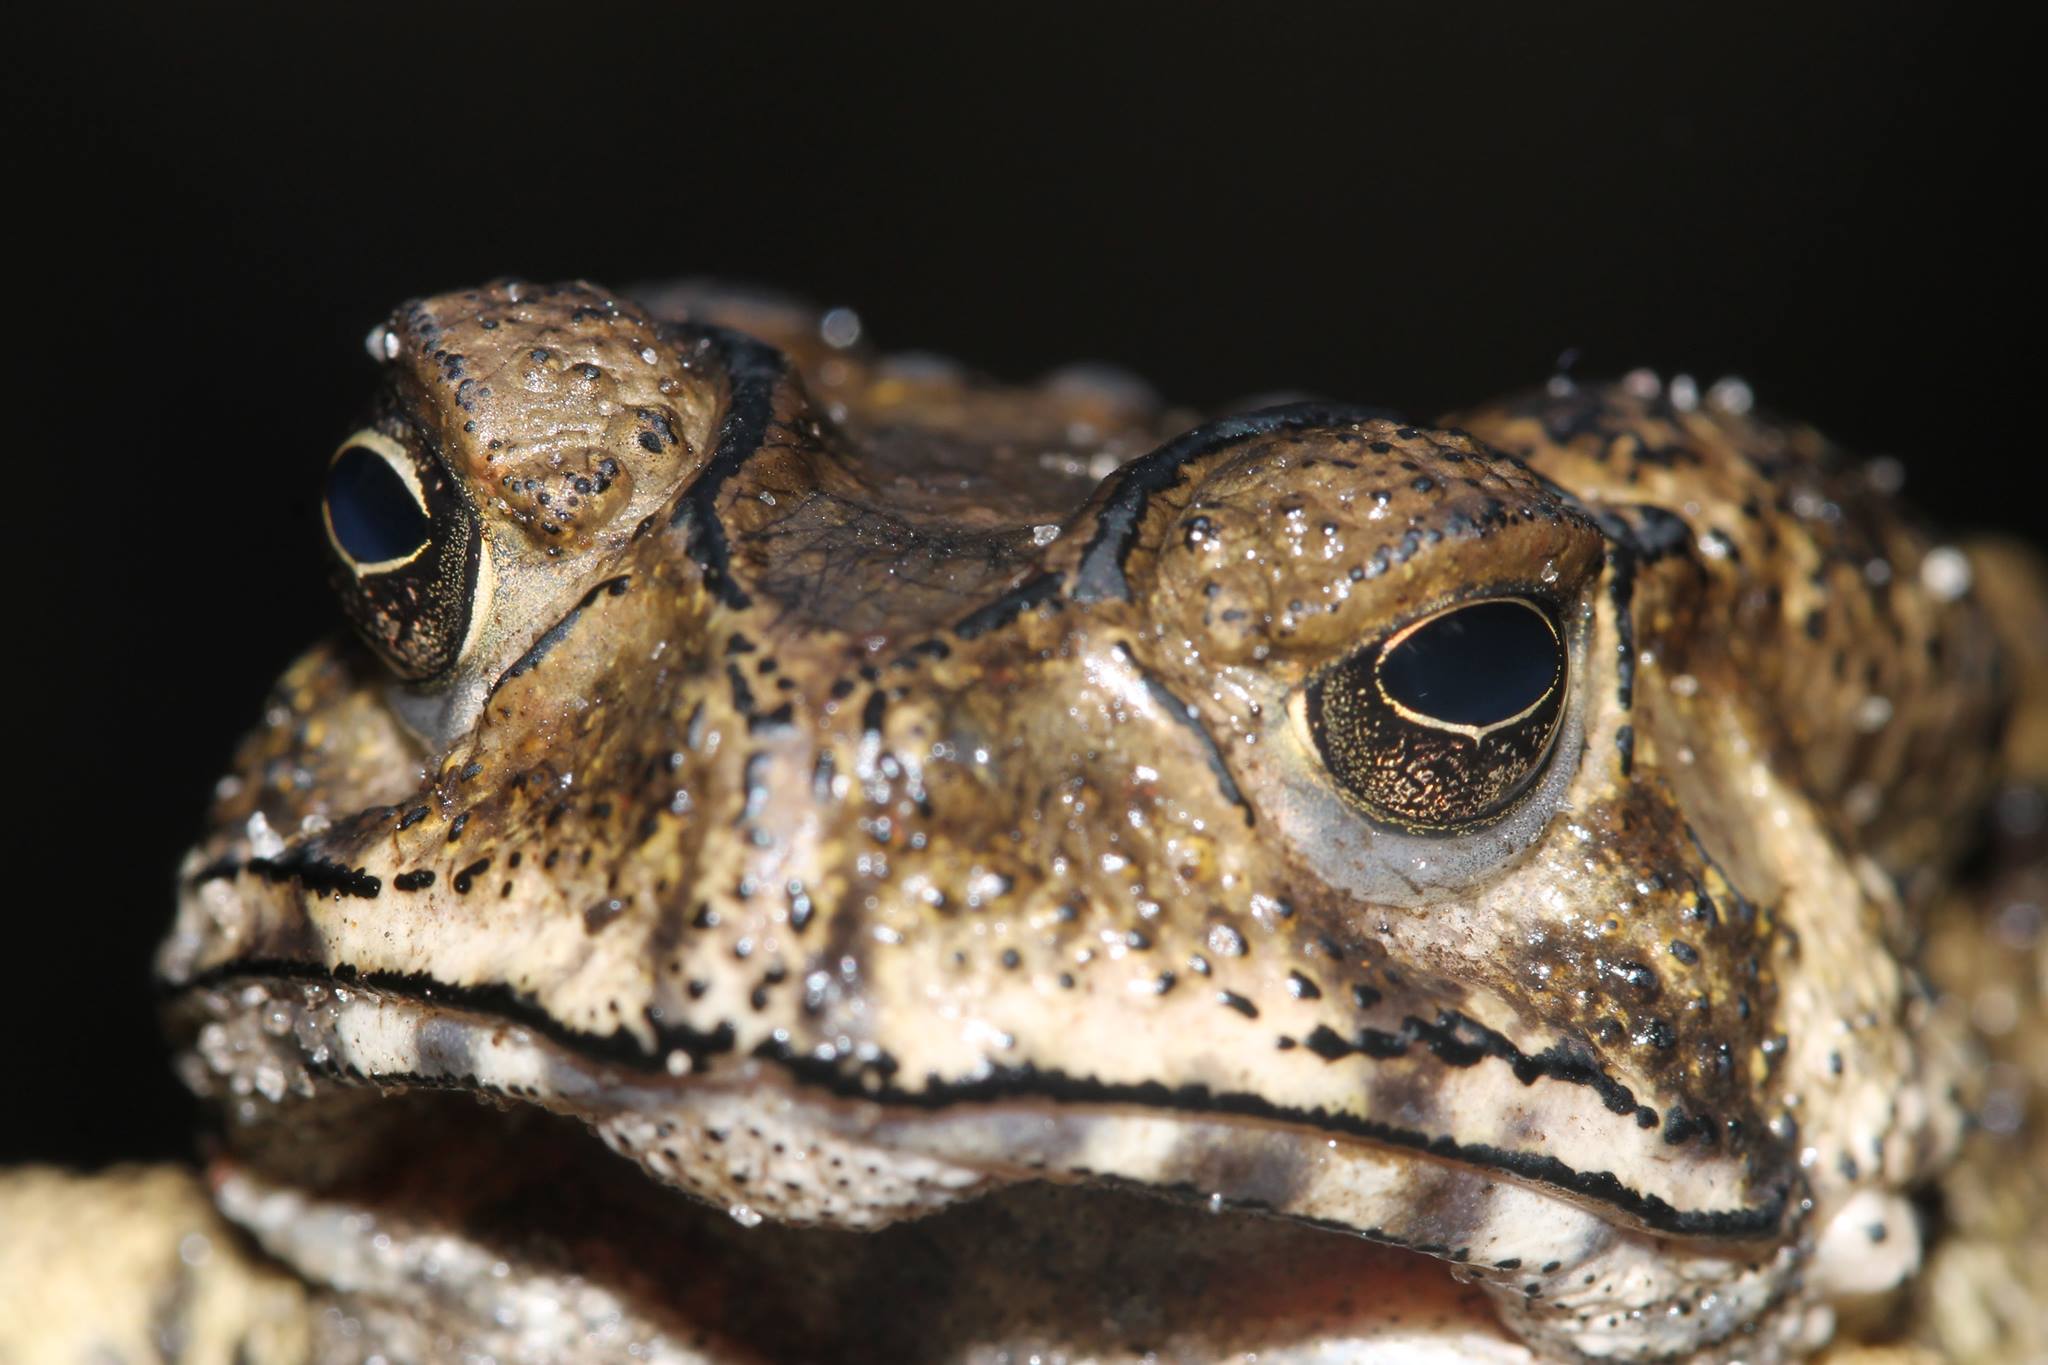 Asian Toad (Duttaphrynus melanostictus) in Madagascar by Franco Andreone, close up